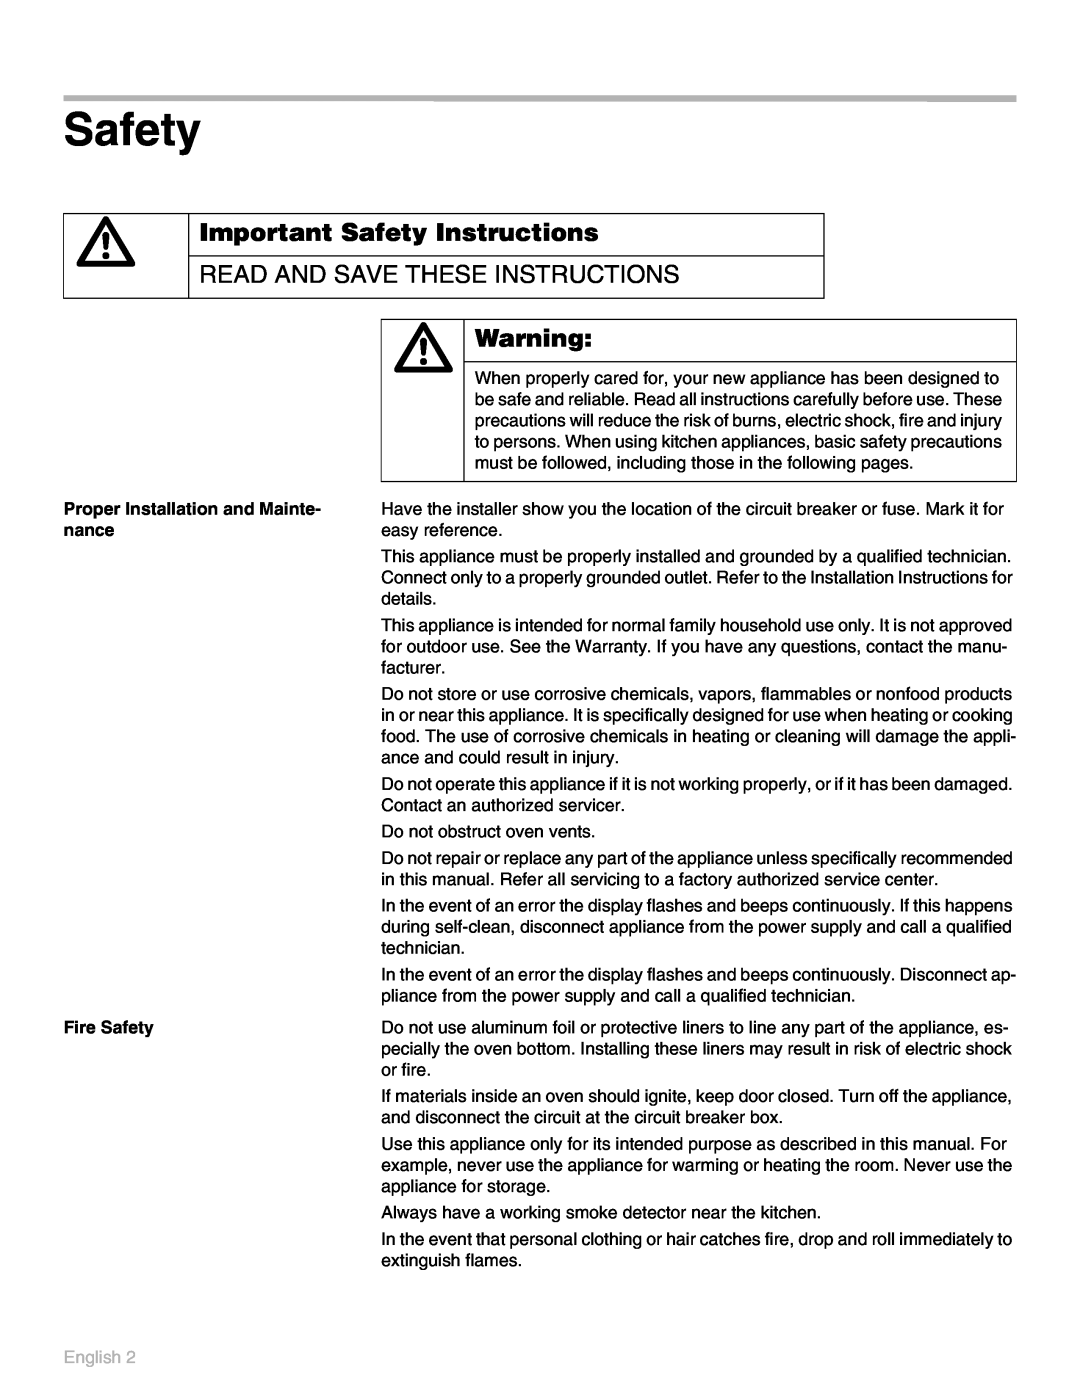 Thermador POD302 manual Safety, Read And Save These Instructions, English 